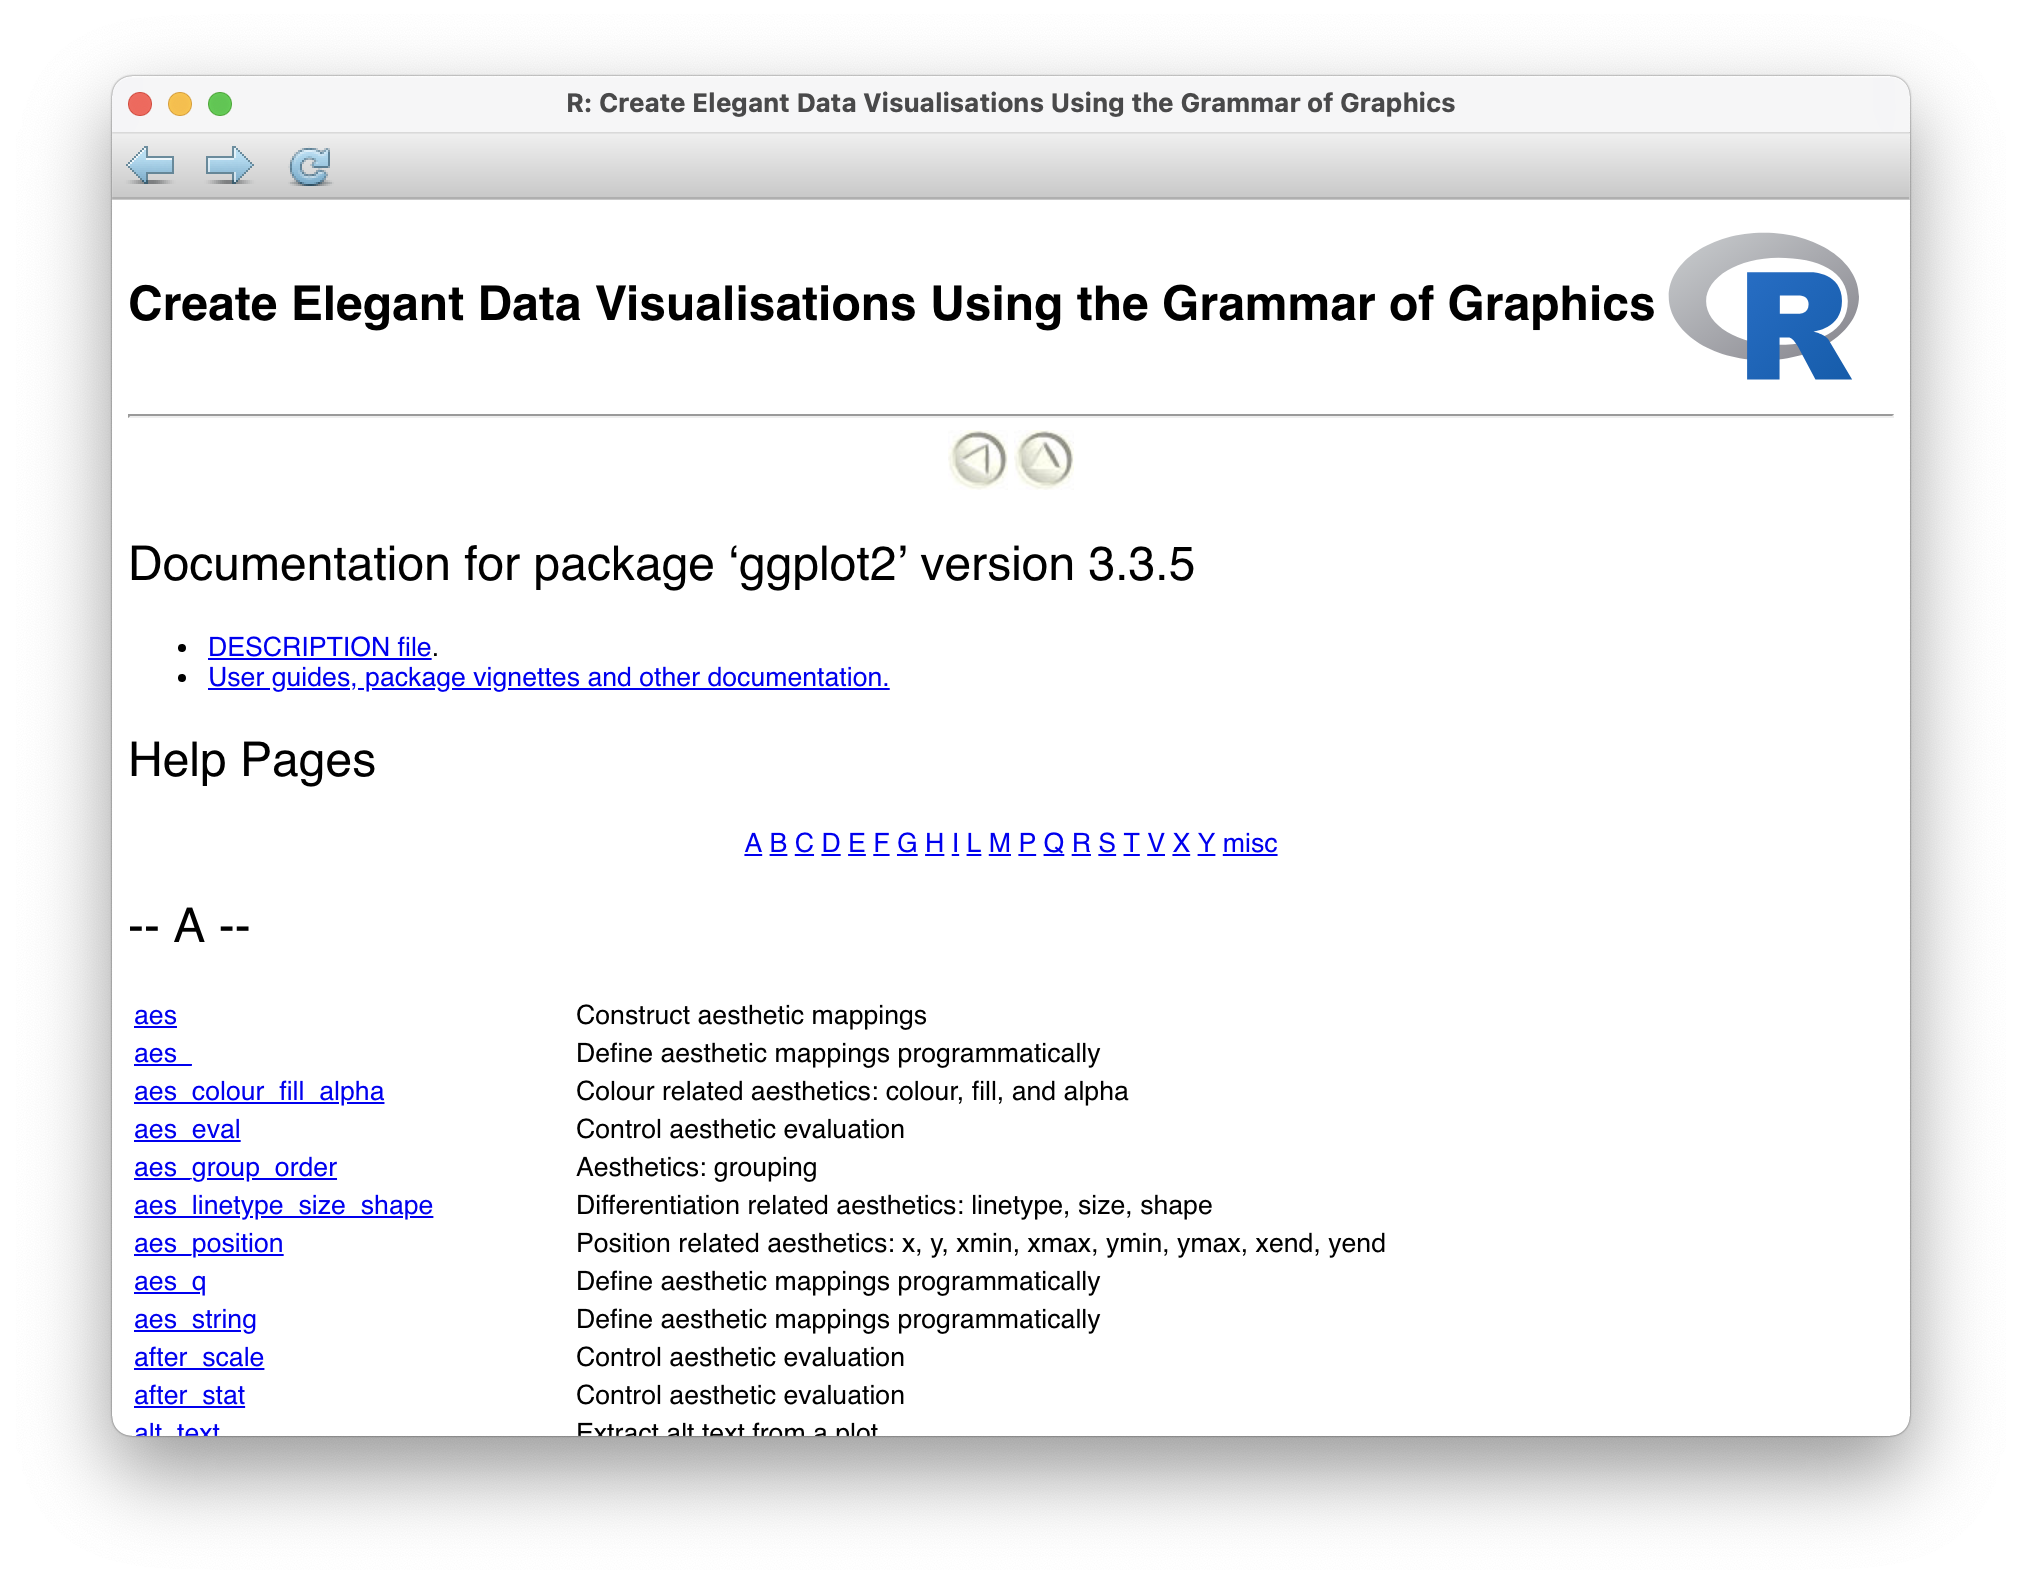 The R package documentation for 'ggplot2'